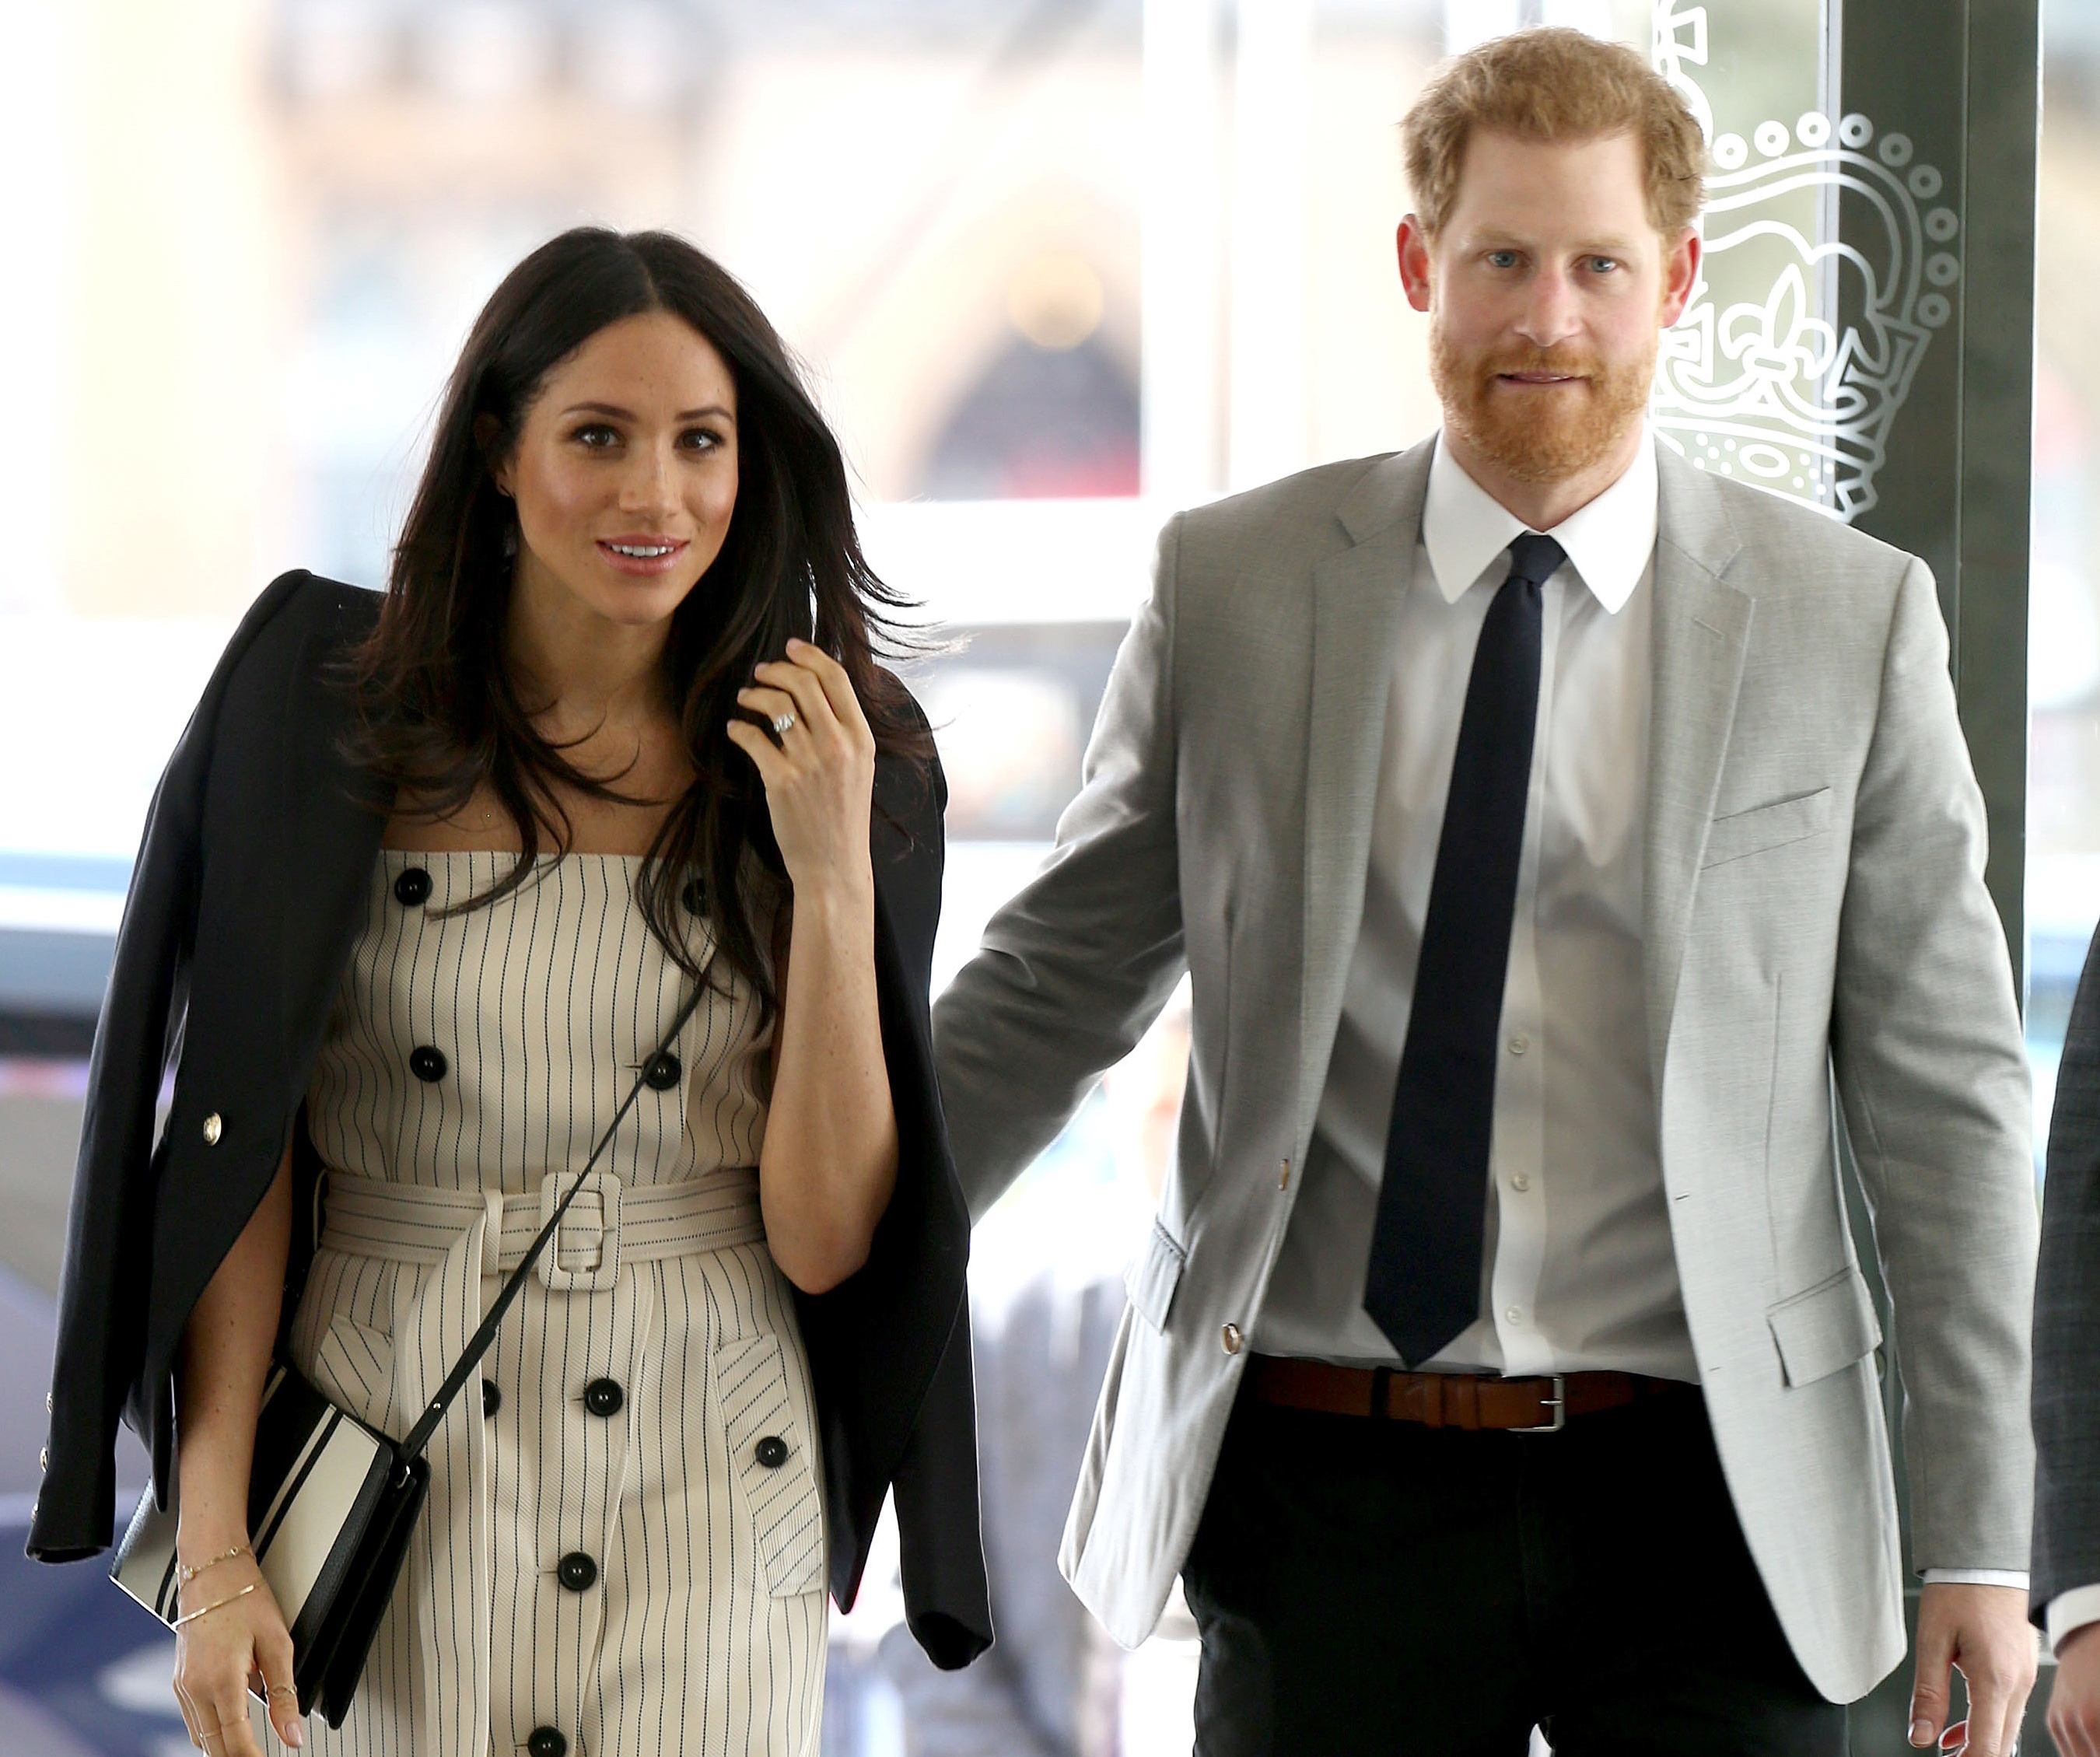 Britain's Prince Harry (R) and his fiancee US actress Meghan Markle, arrive to attend a reception with delegates from the Commonwealth Youth Forum